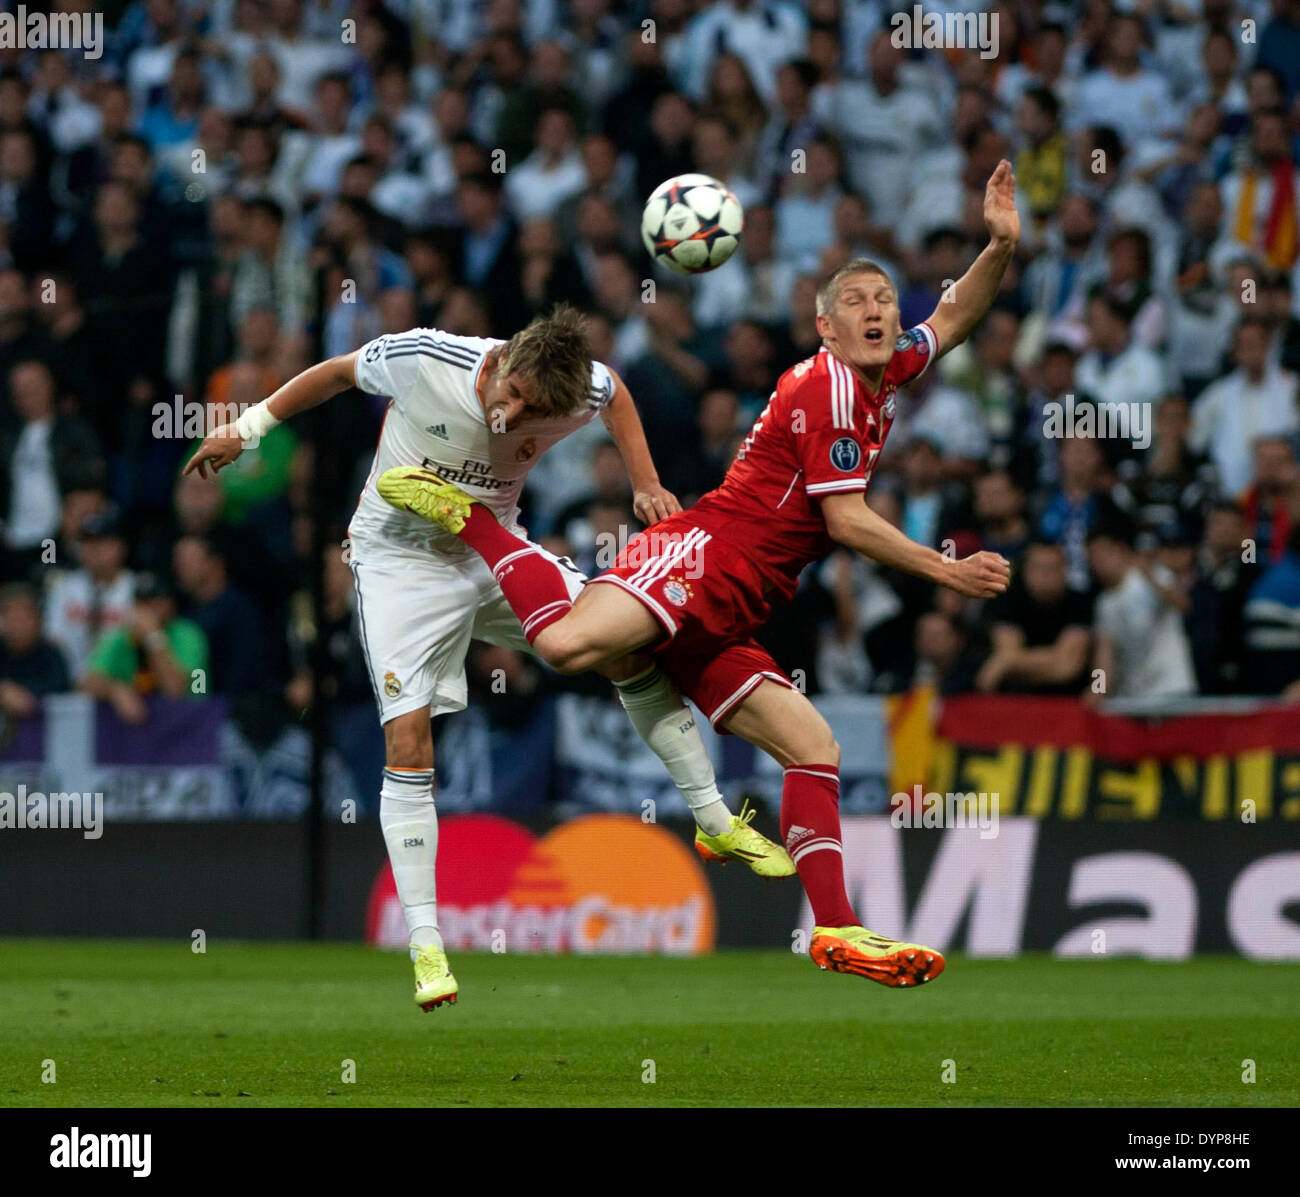 Madrid, Spain. 23rd Apr, 2014. Real Madrid's Fabio Coentrao (L) vies with Bayern Munich's Bastian Schweinsteiger during their UEFA Champion League semi-final first leg soccer match in Madrid, Spain, April 23, 2014. Real Madrid won the match 1-0. © Xie Haining/Xinhua/Alamy Live News Stock Photo